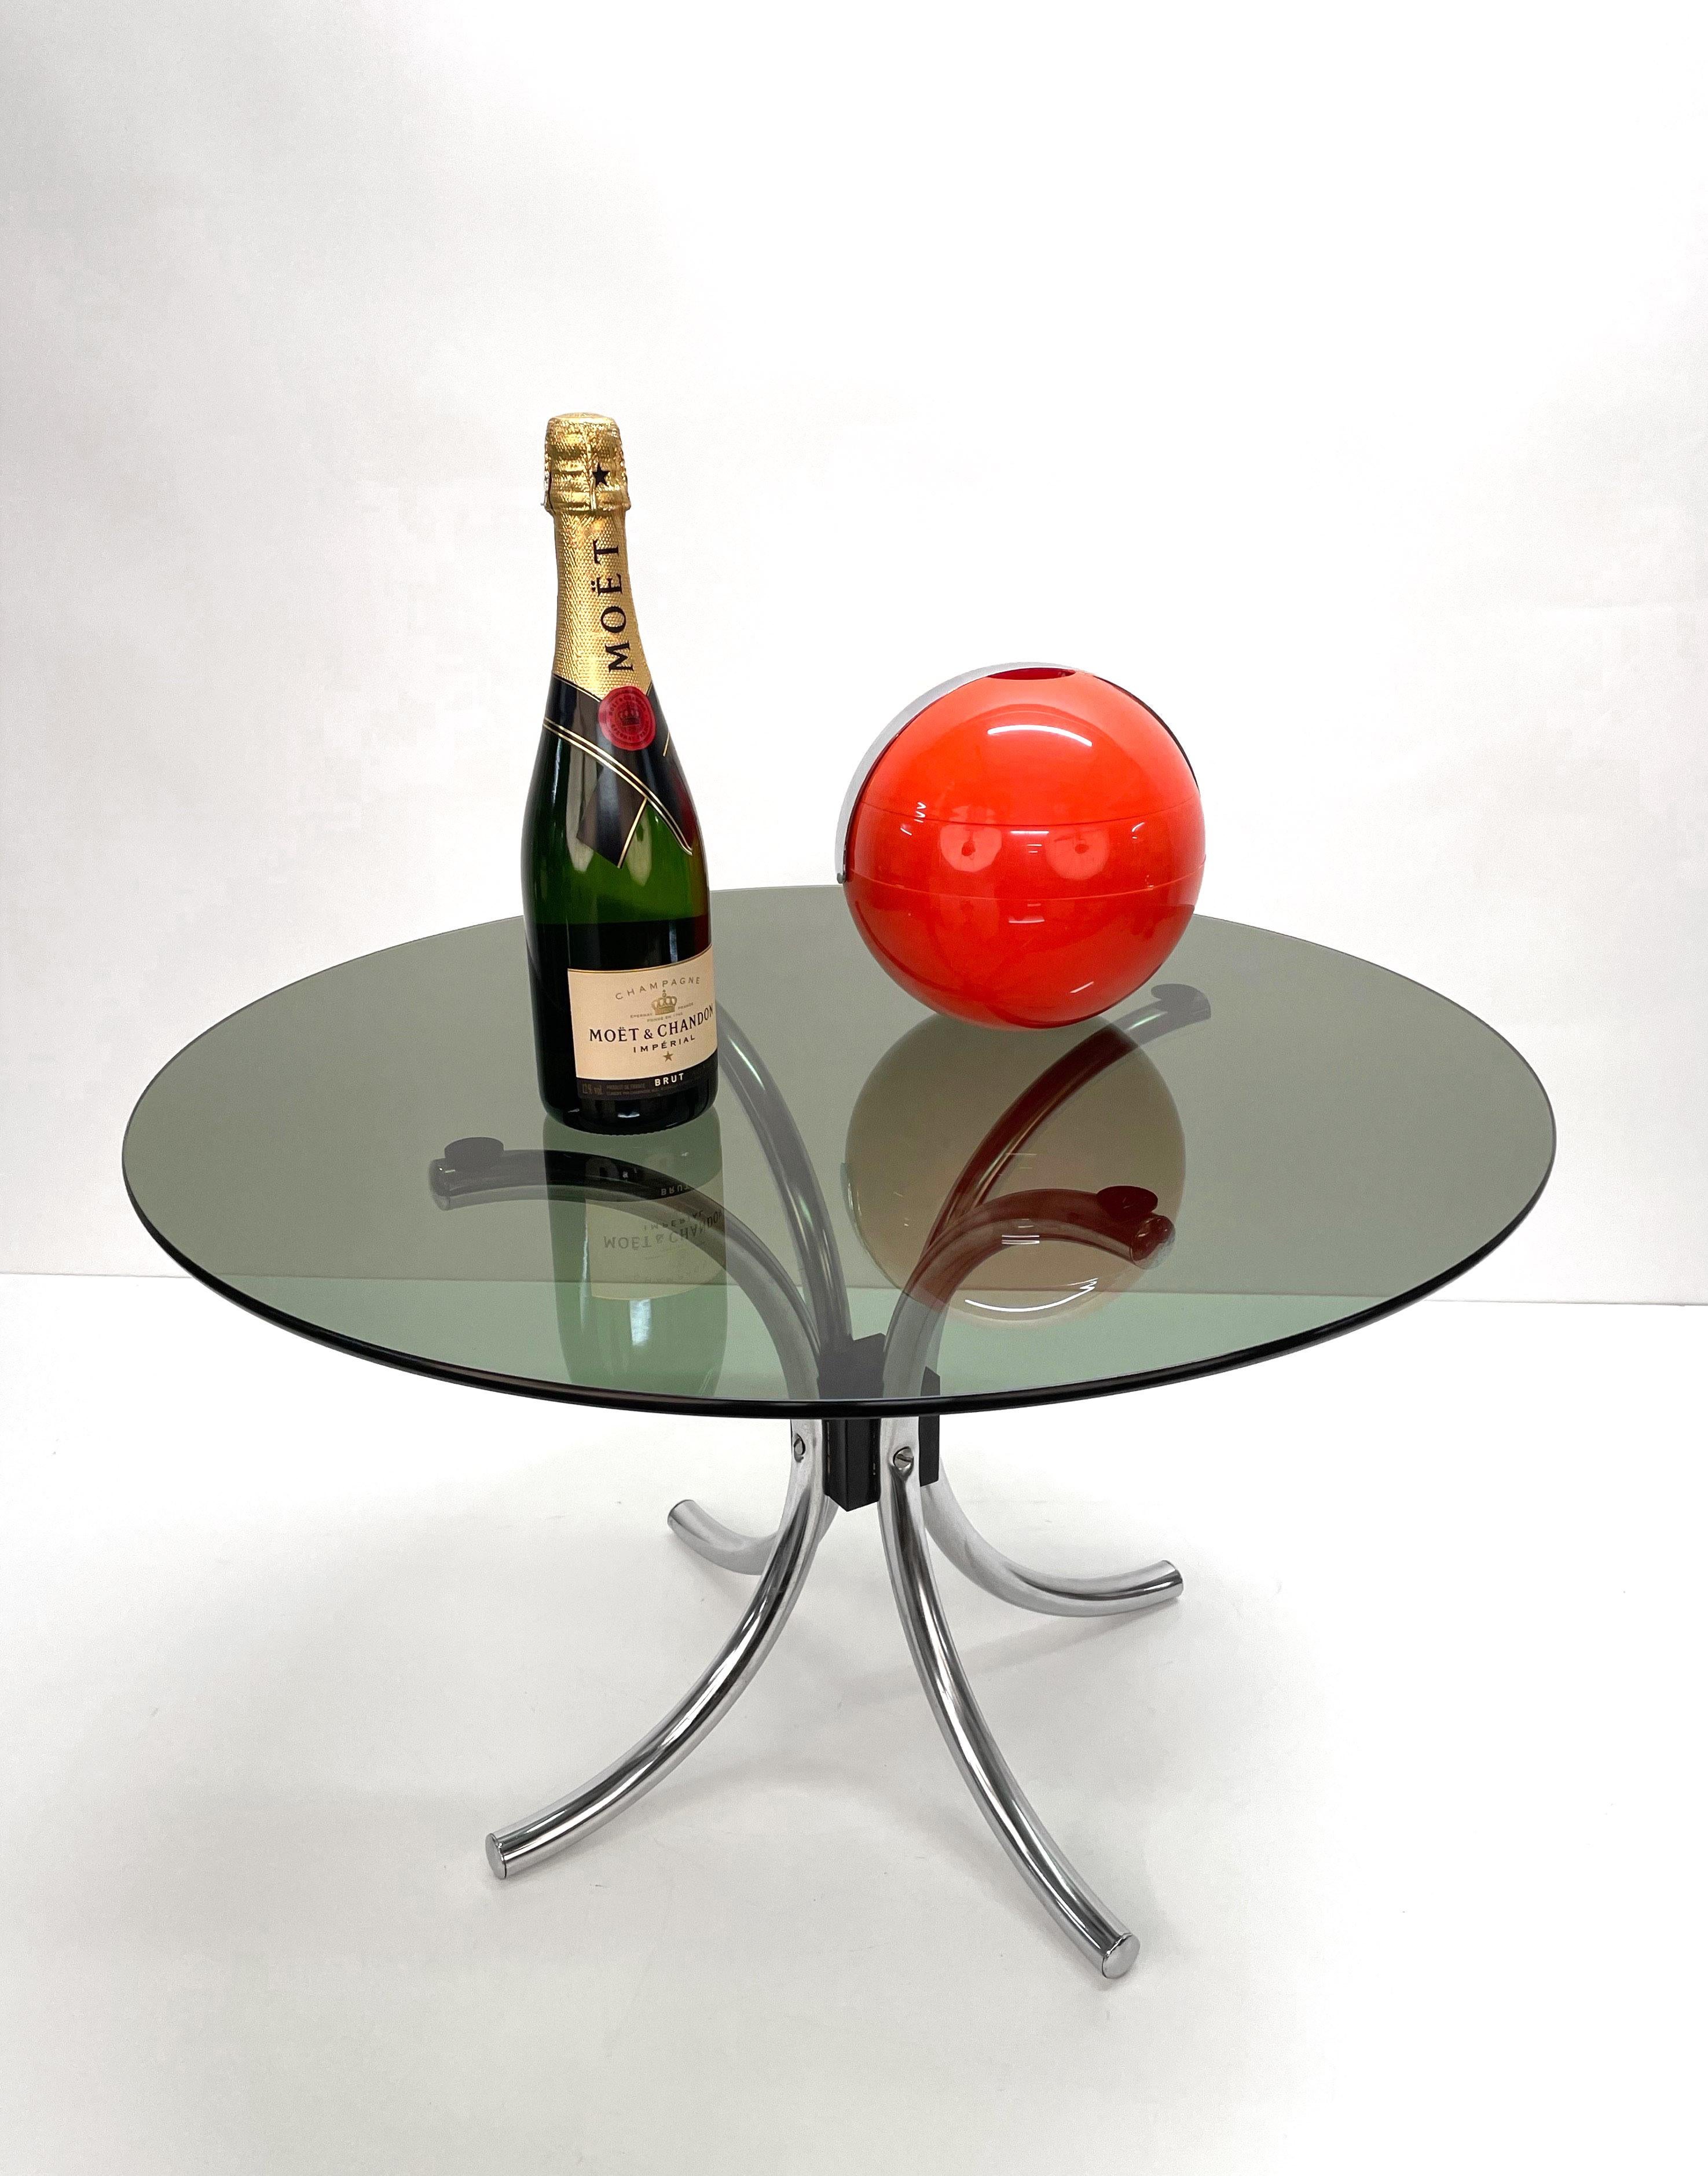 Midcentury Chromed Steel Italian Coffee Table with Smoked Glass Round Top, 1960s For Sale 7